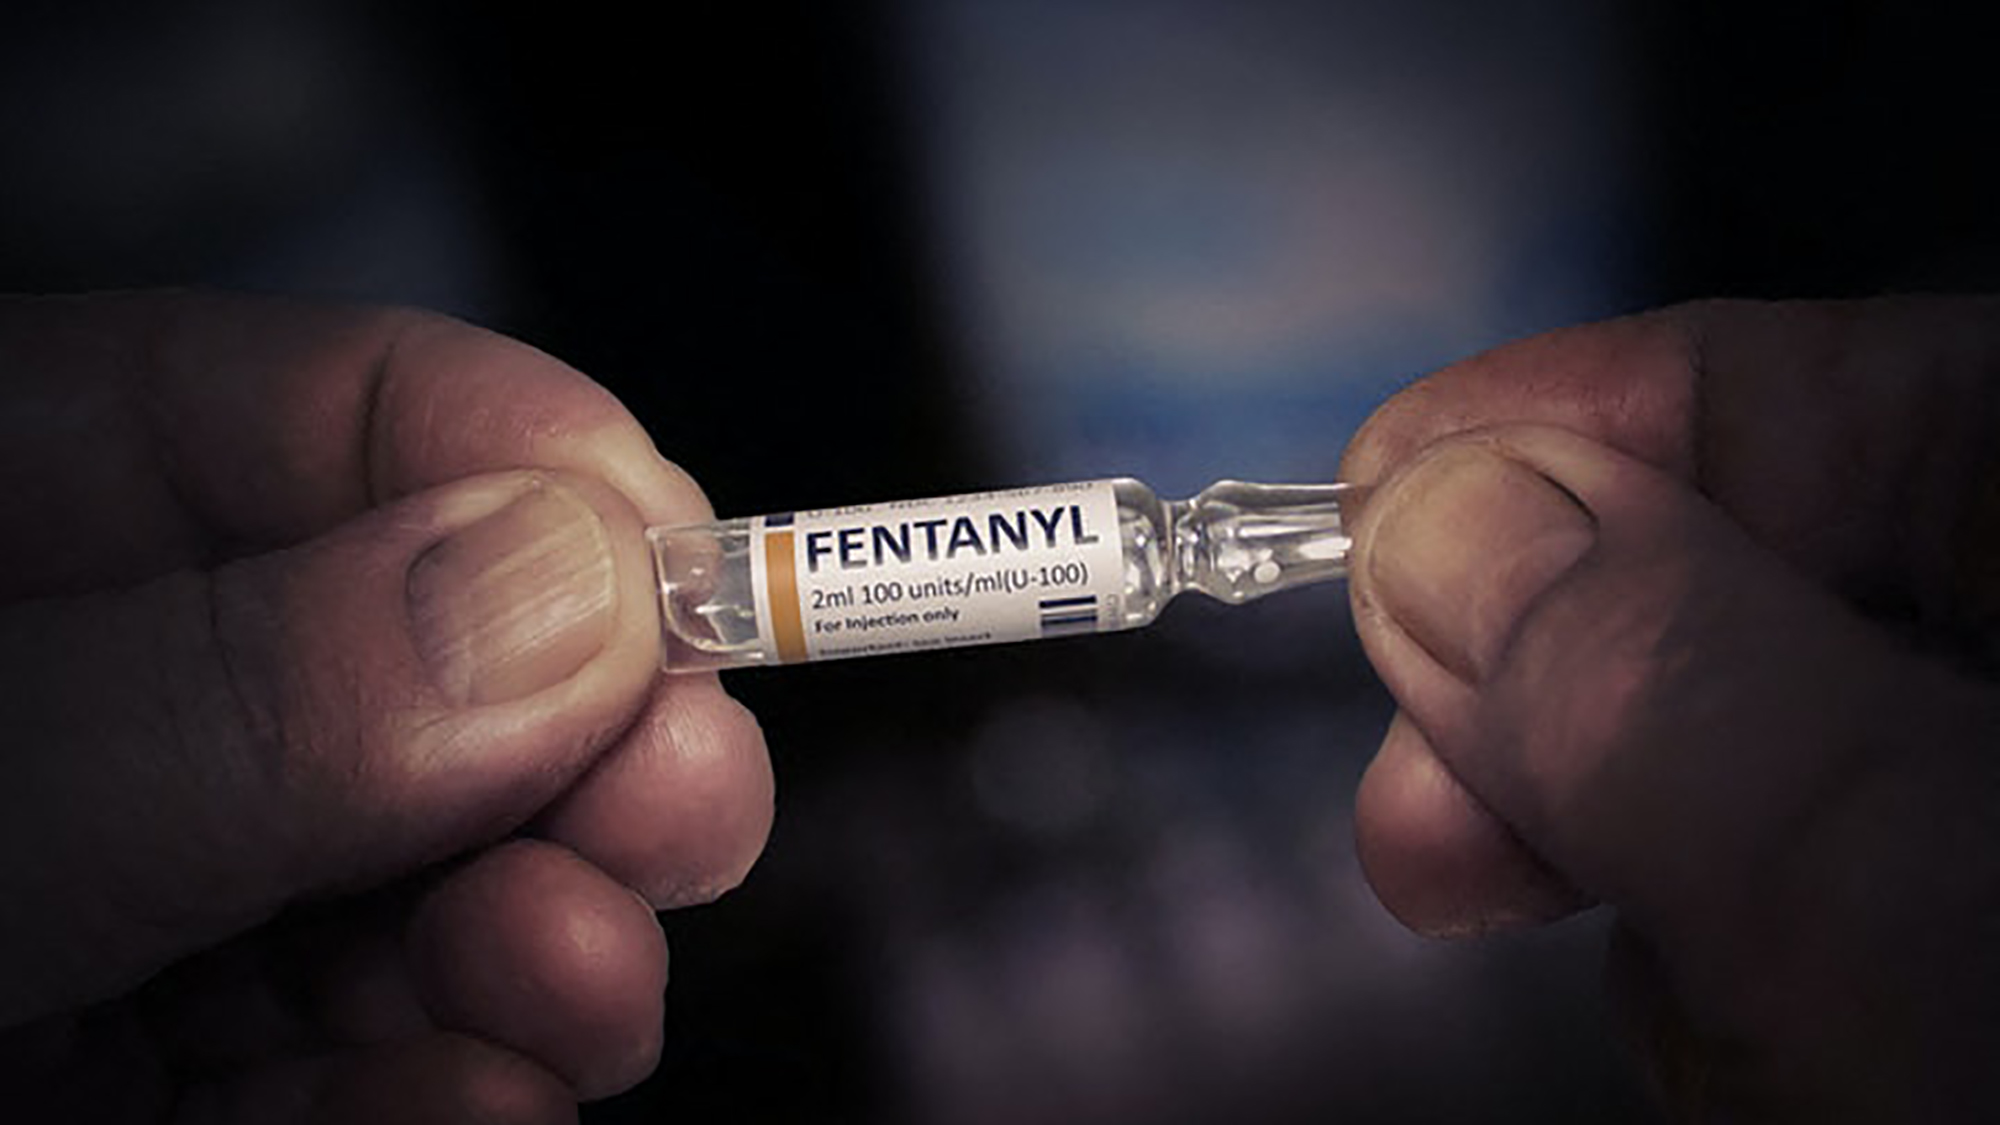 China's role in the fentanyl crisis